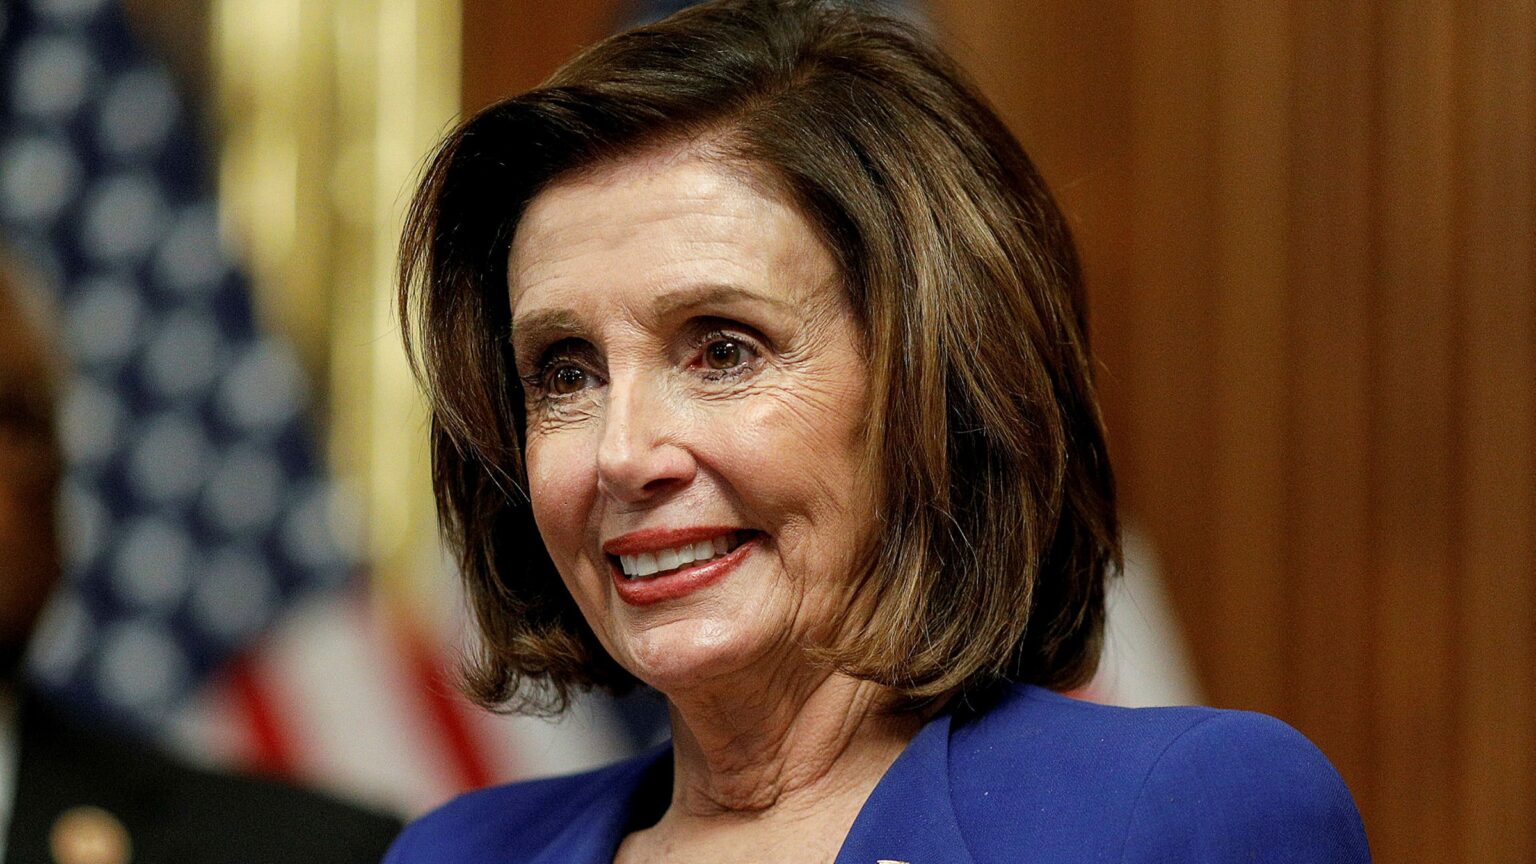 Did Speaker of the House Nancy Pelosi dip into Donald Trump's pockets? Her net worth suggests that we might be on track! Check out Pelosi's earnings.